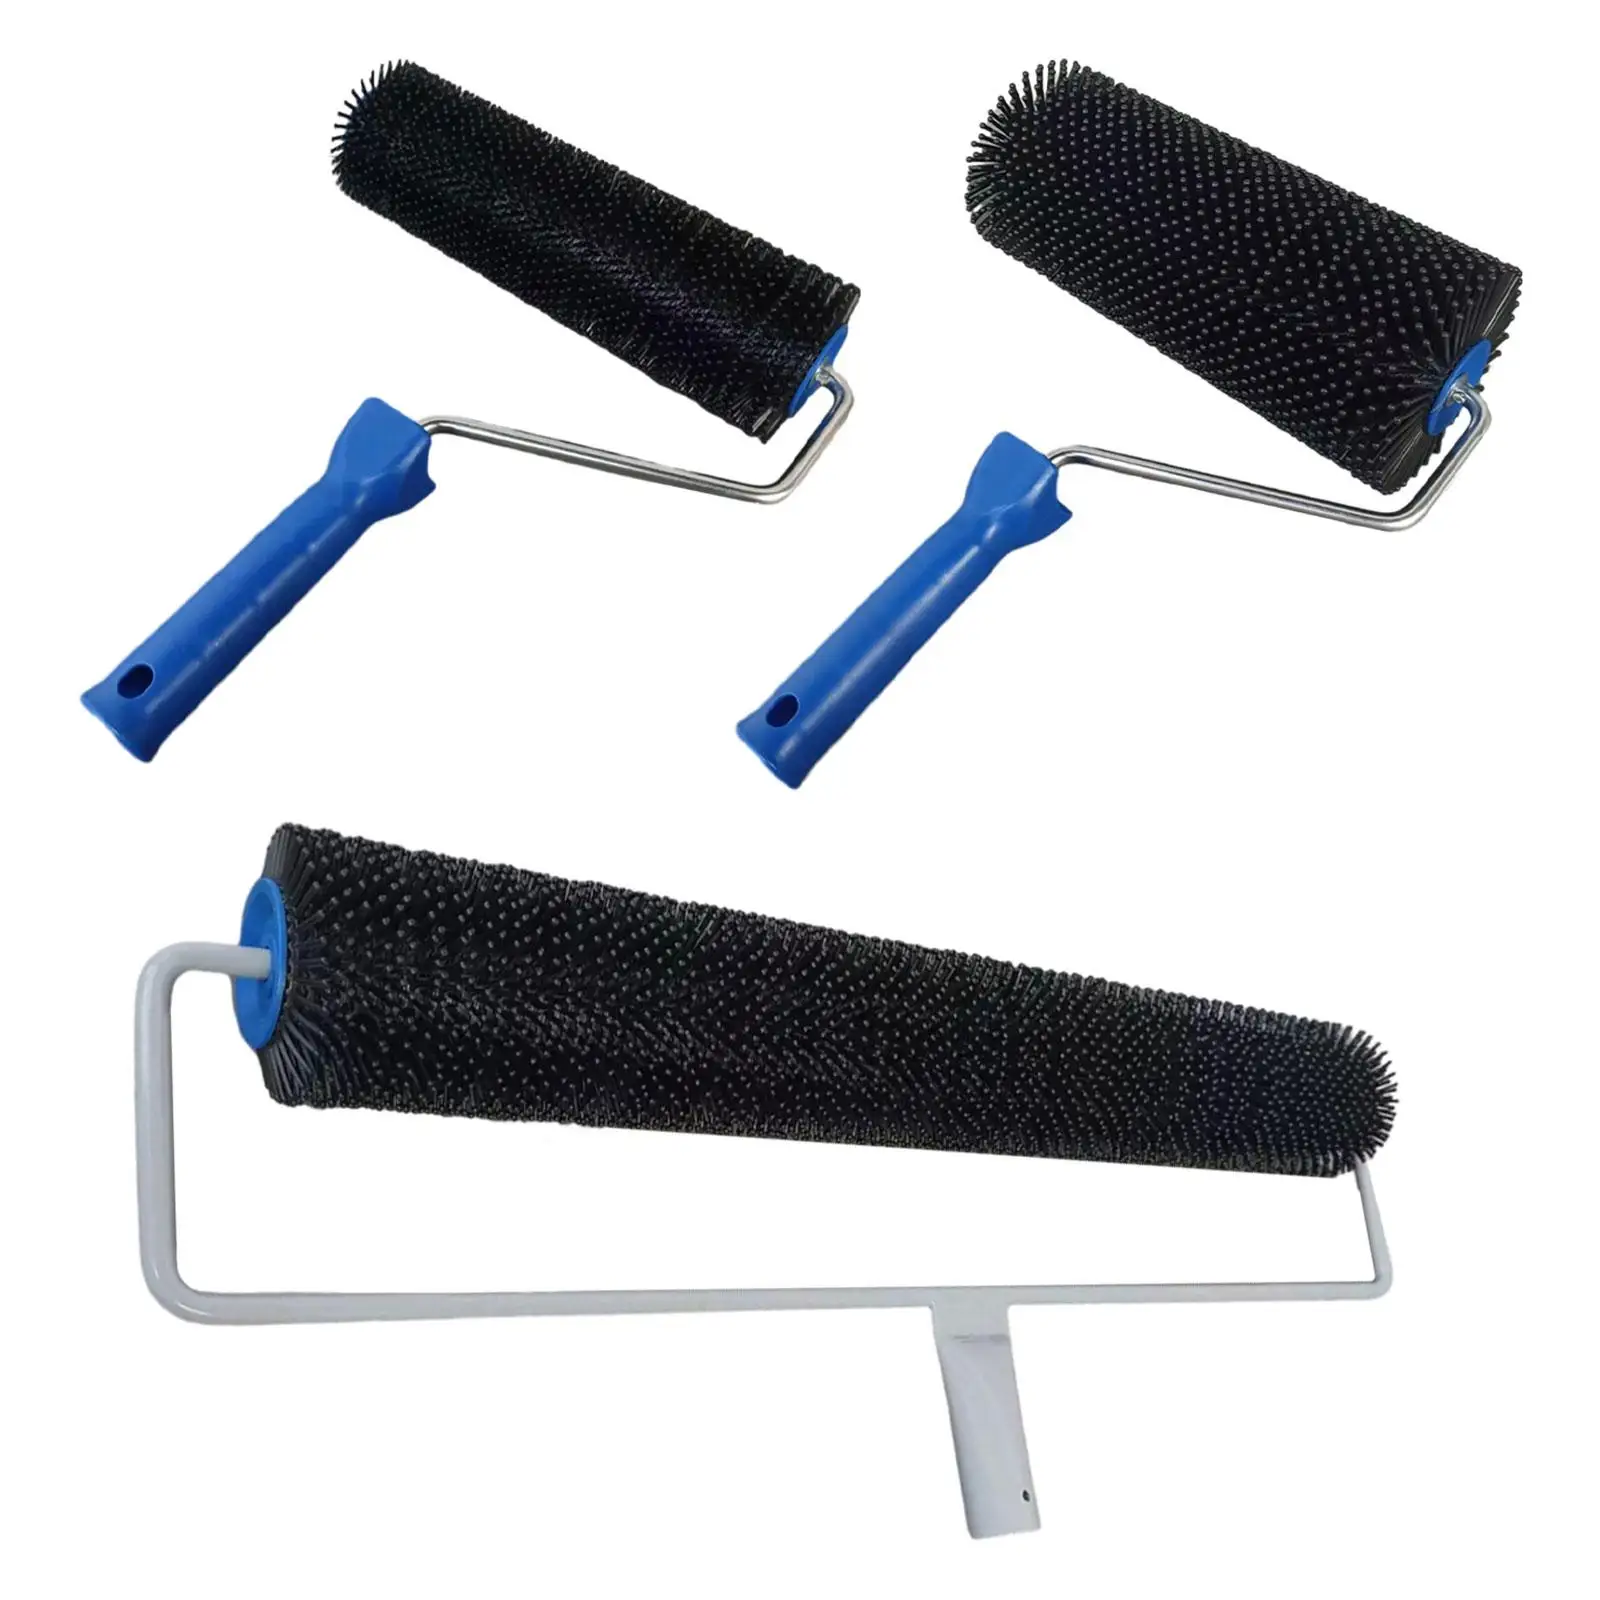 Screed Spiked Roller Spiked Aeration Roller Professional Defoaming Roller Interior Paint Brush for Cement Paint Concrete Wall